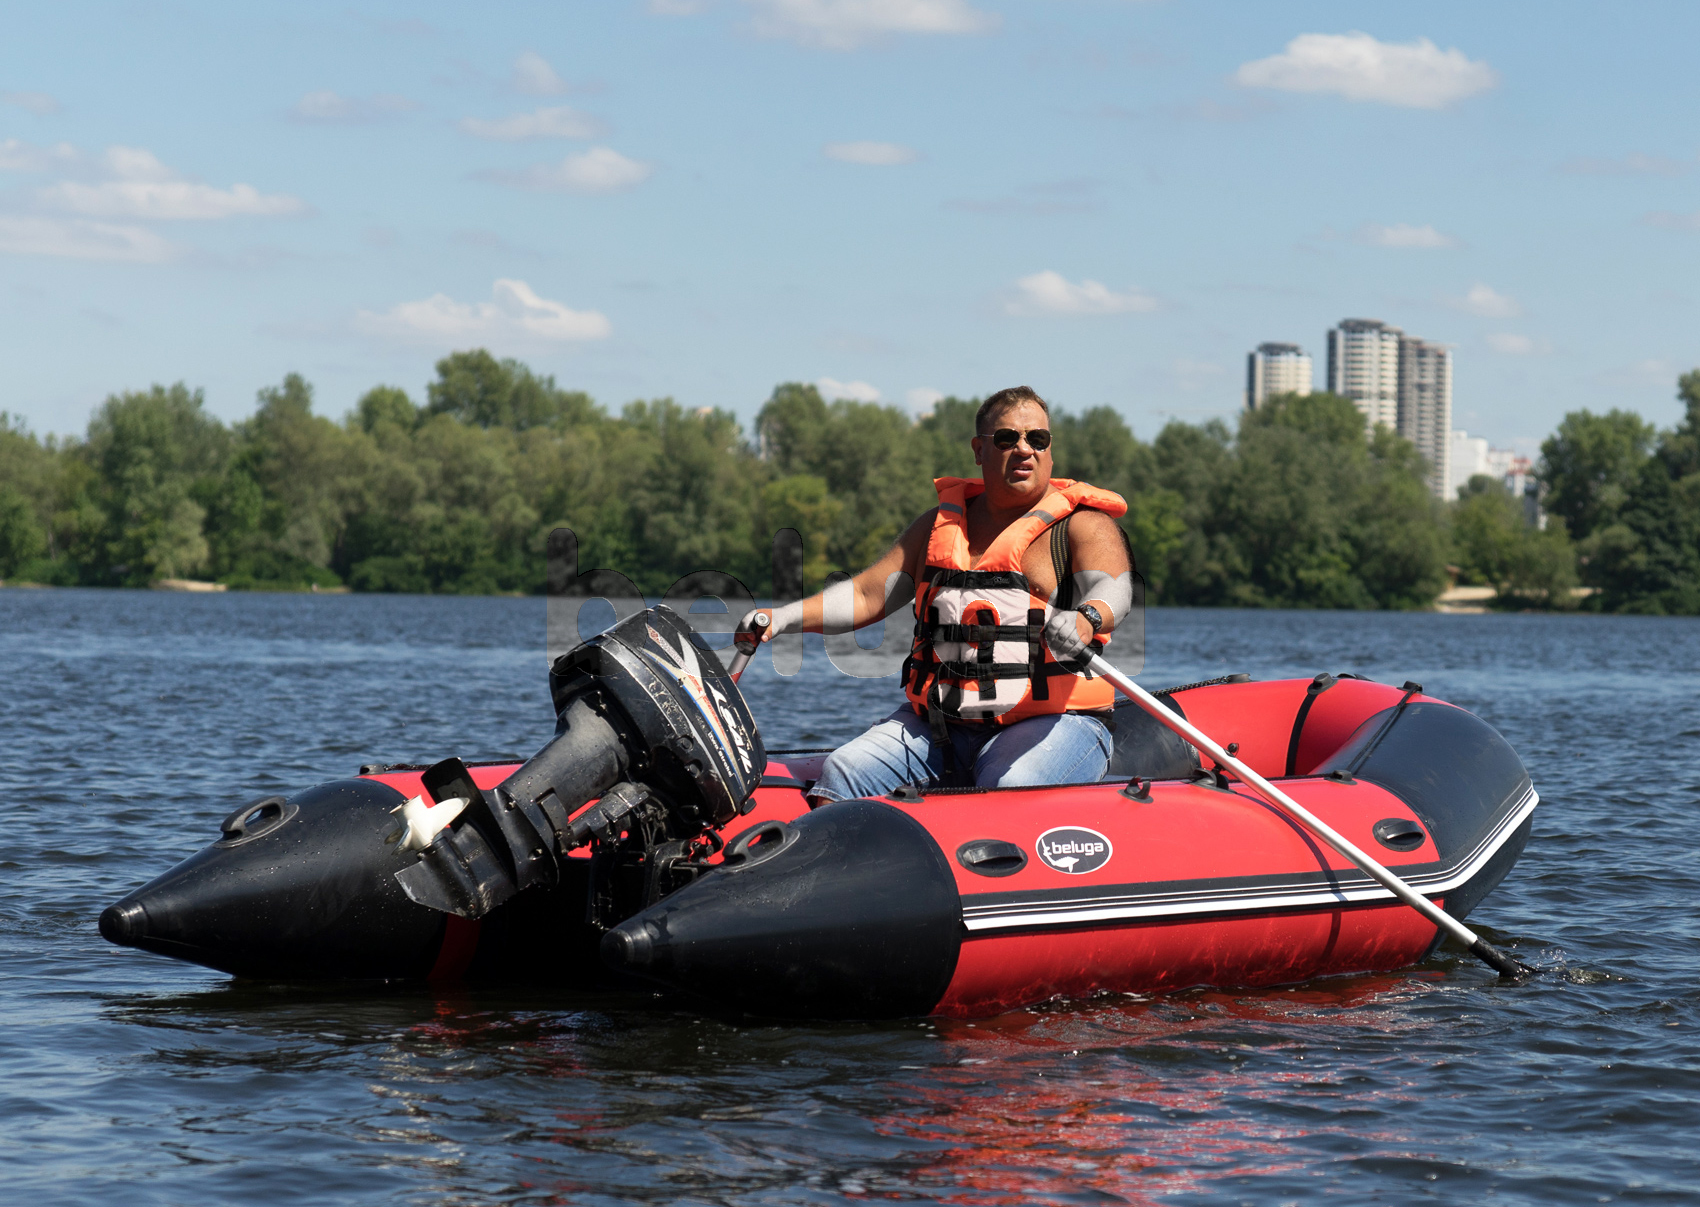 Inflatable Boats: Beluga 14FT. Red/Black Inflatable Boat K-14RFDRED/3